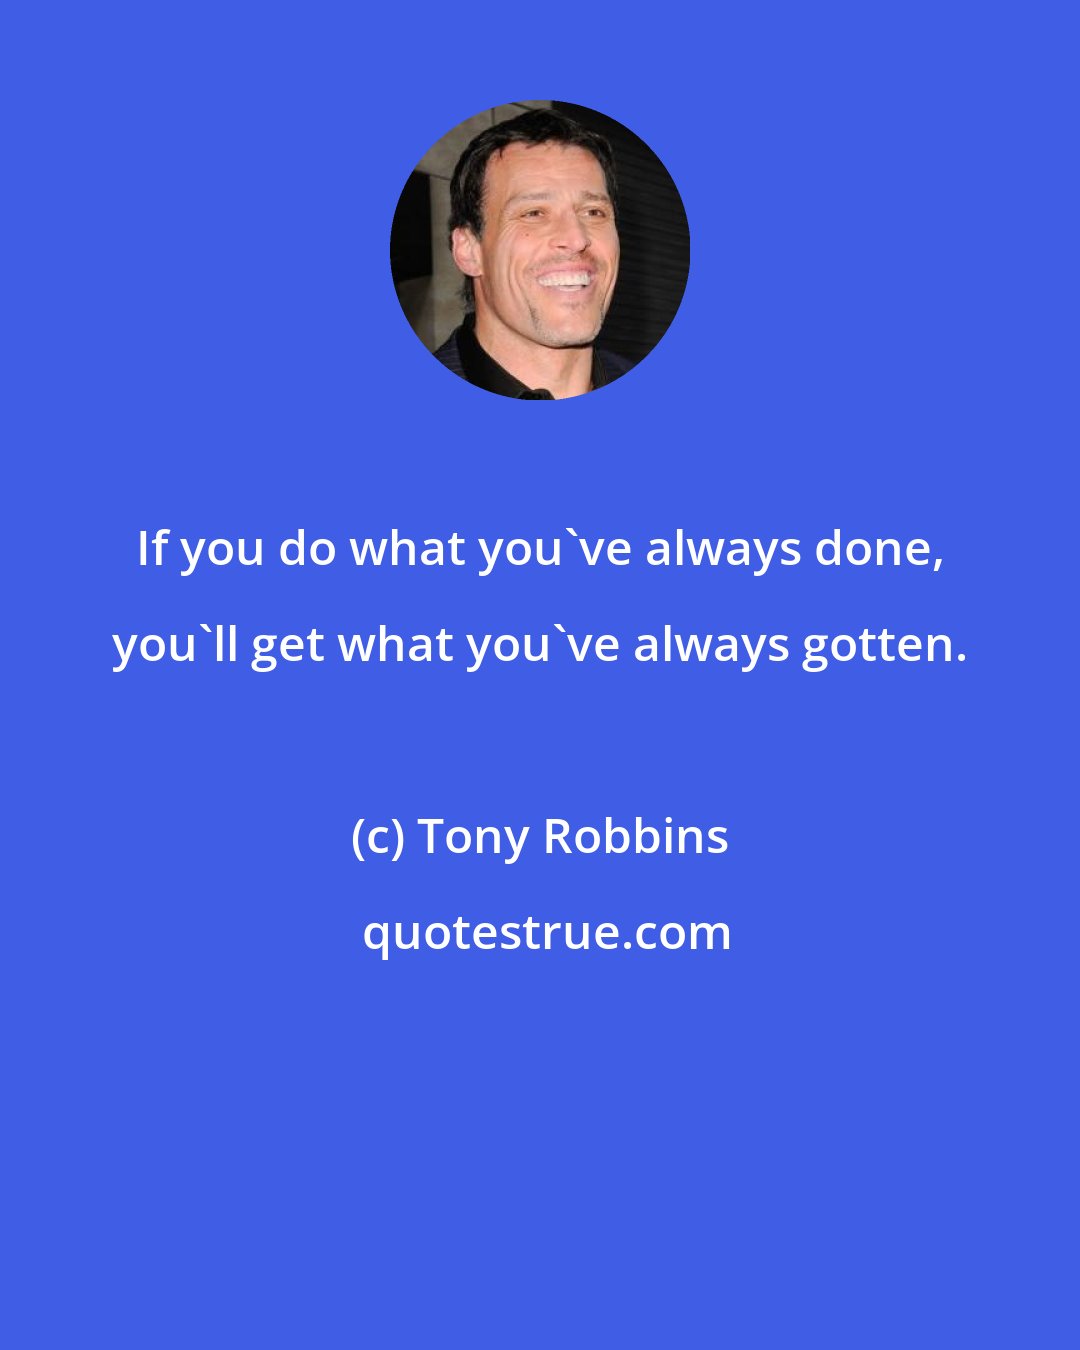 Tony Robbins: If you do what you've always done, you'll get what you've always gotten.